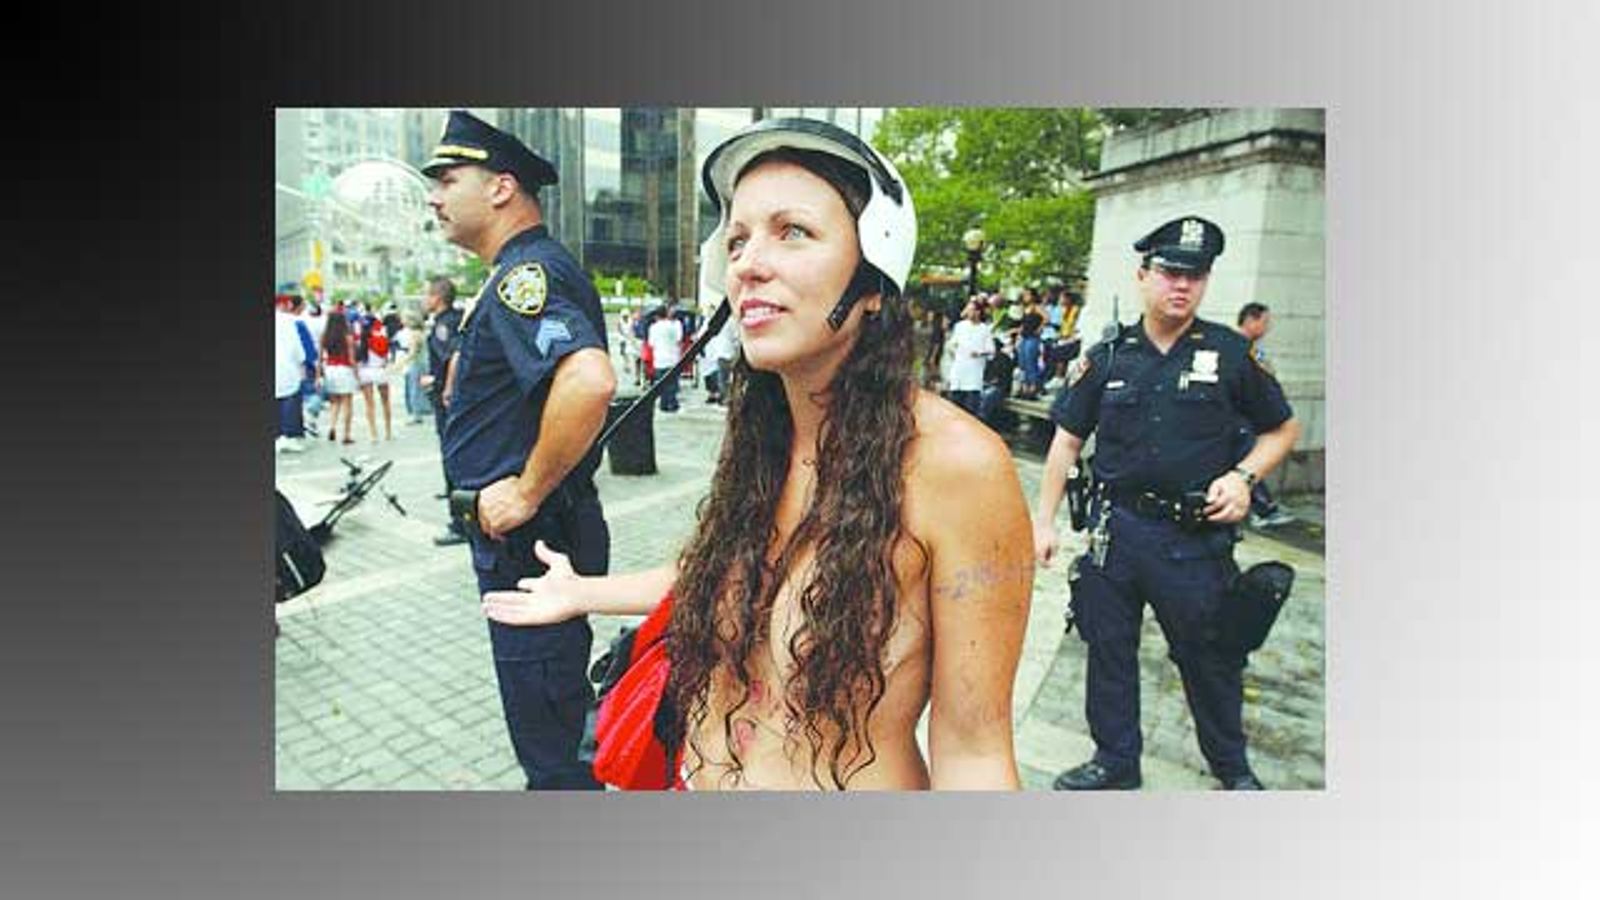 NJ Appeals Court: Bare (Women's) Tits on Beach Are Immoral